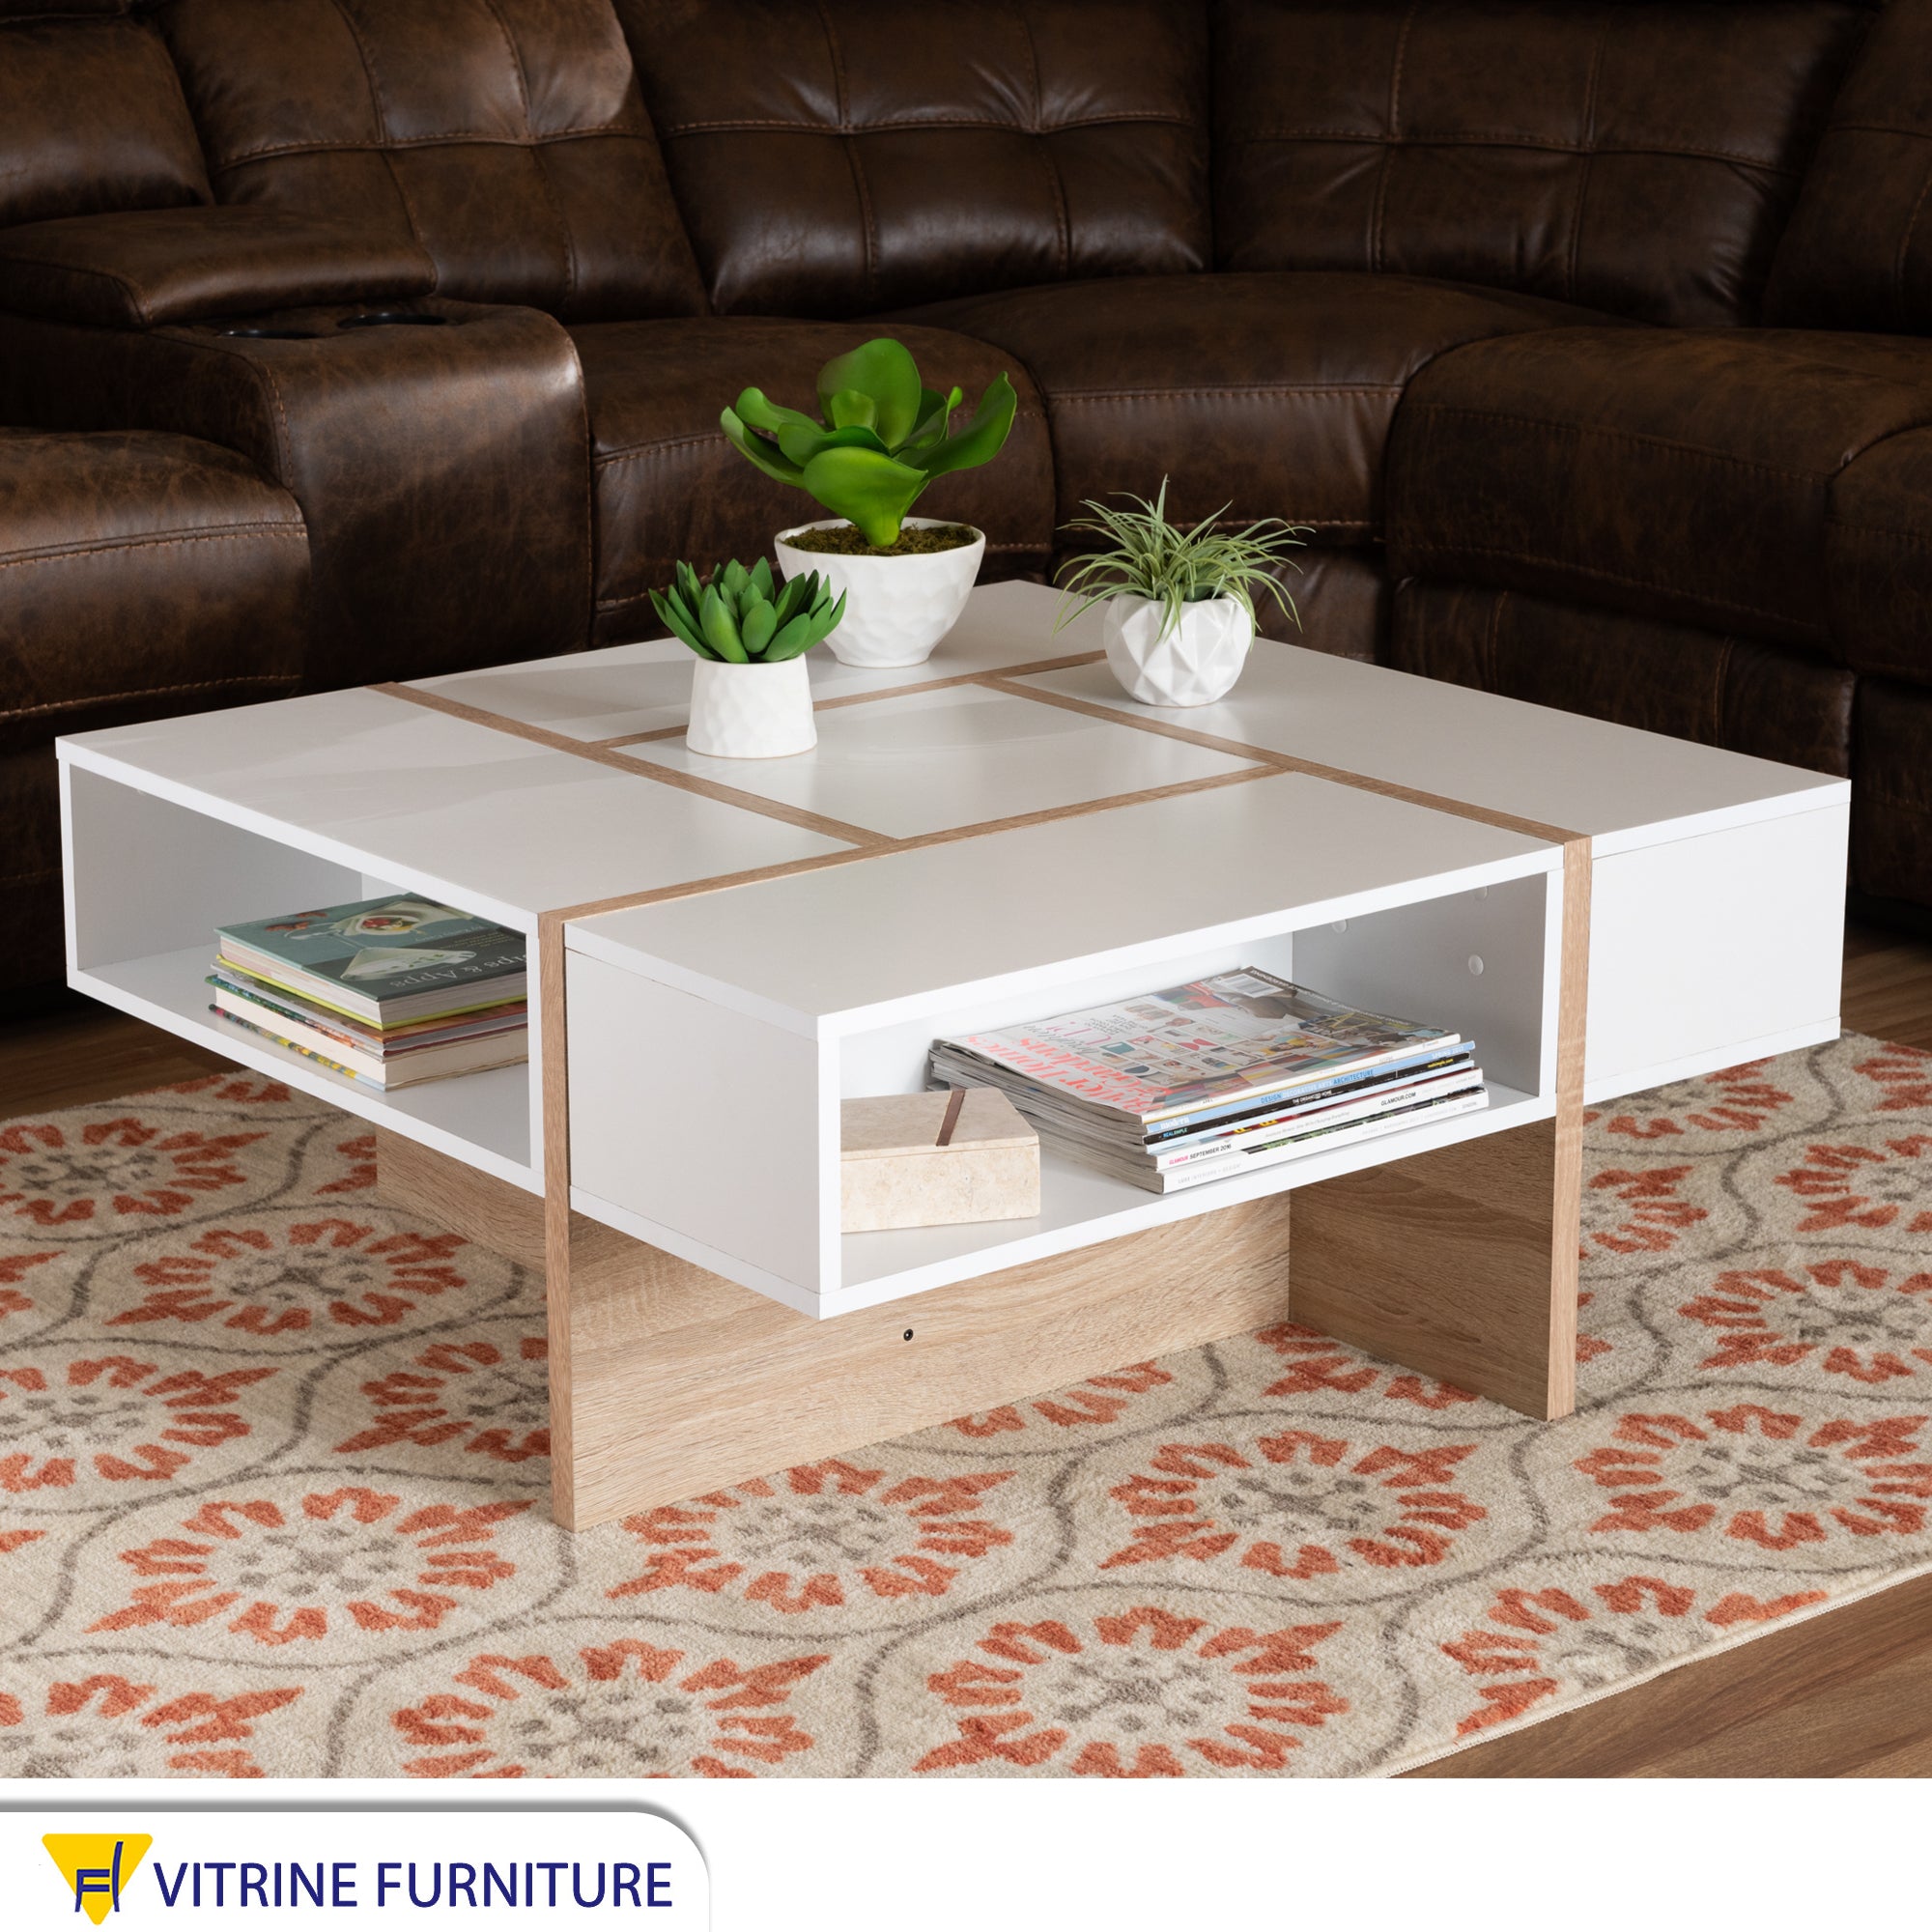 White center table decorated with brown stripes